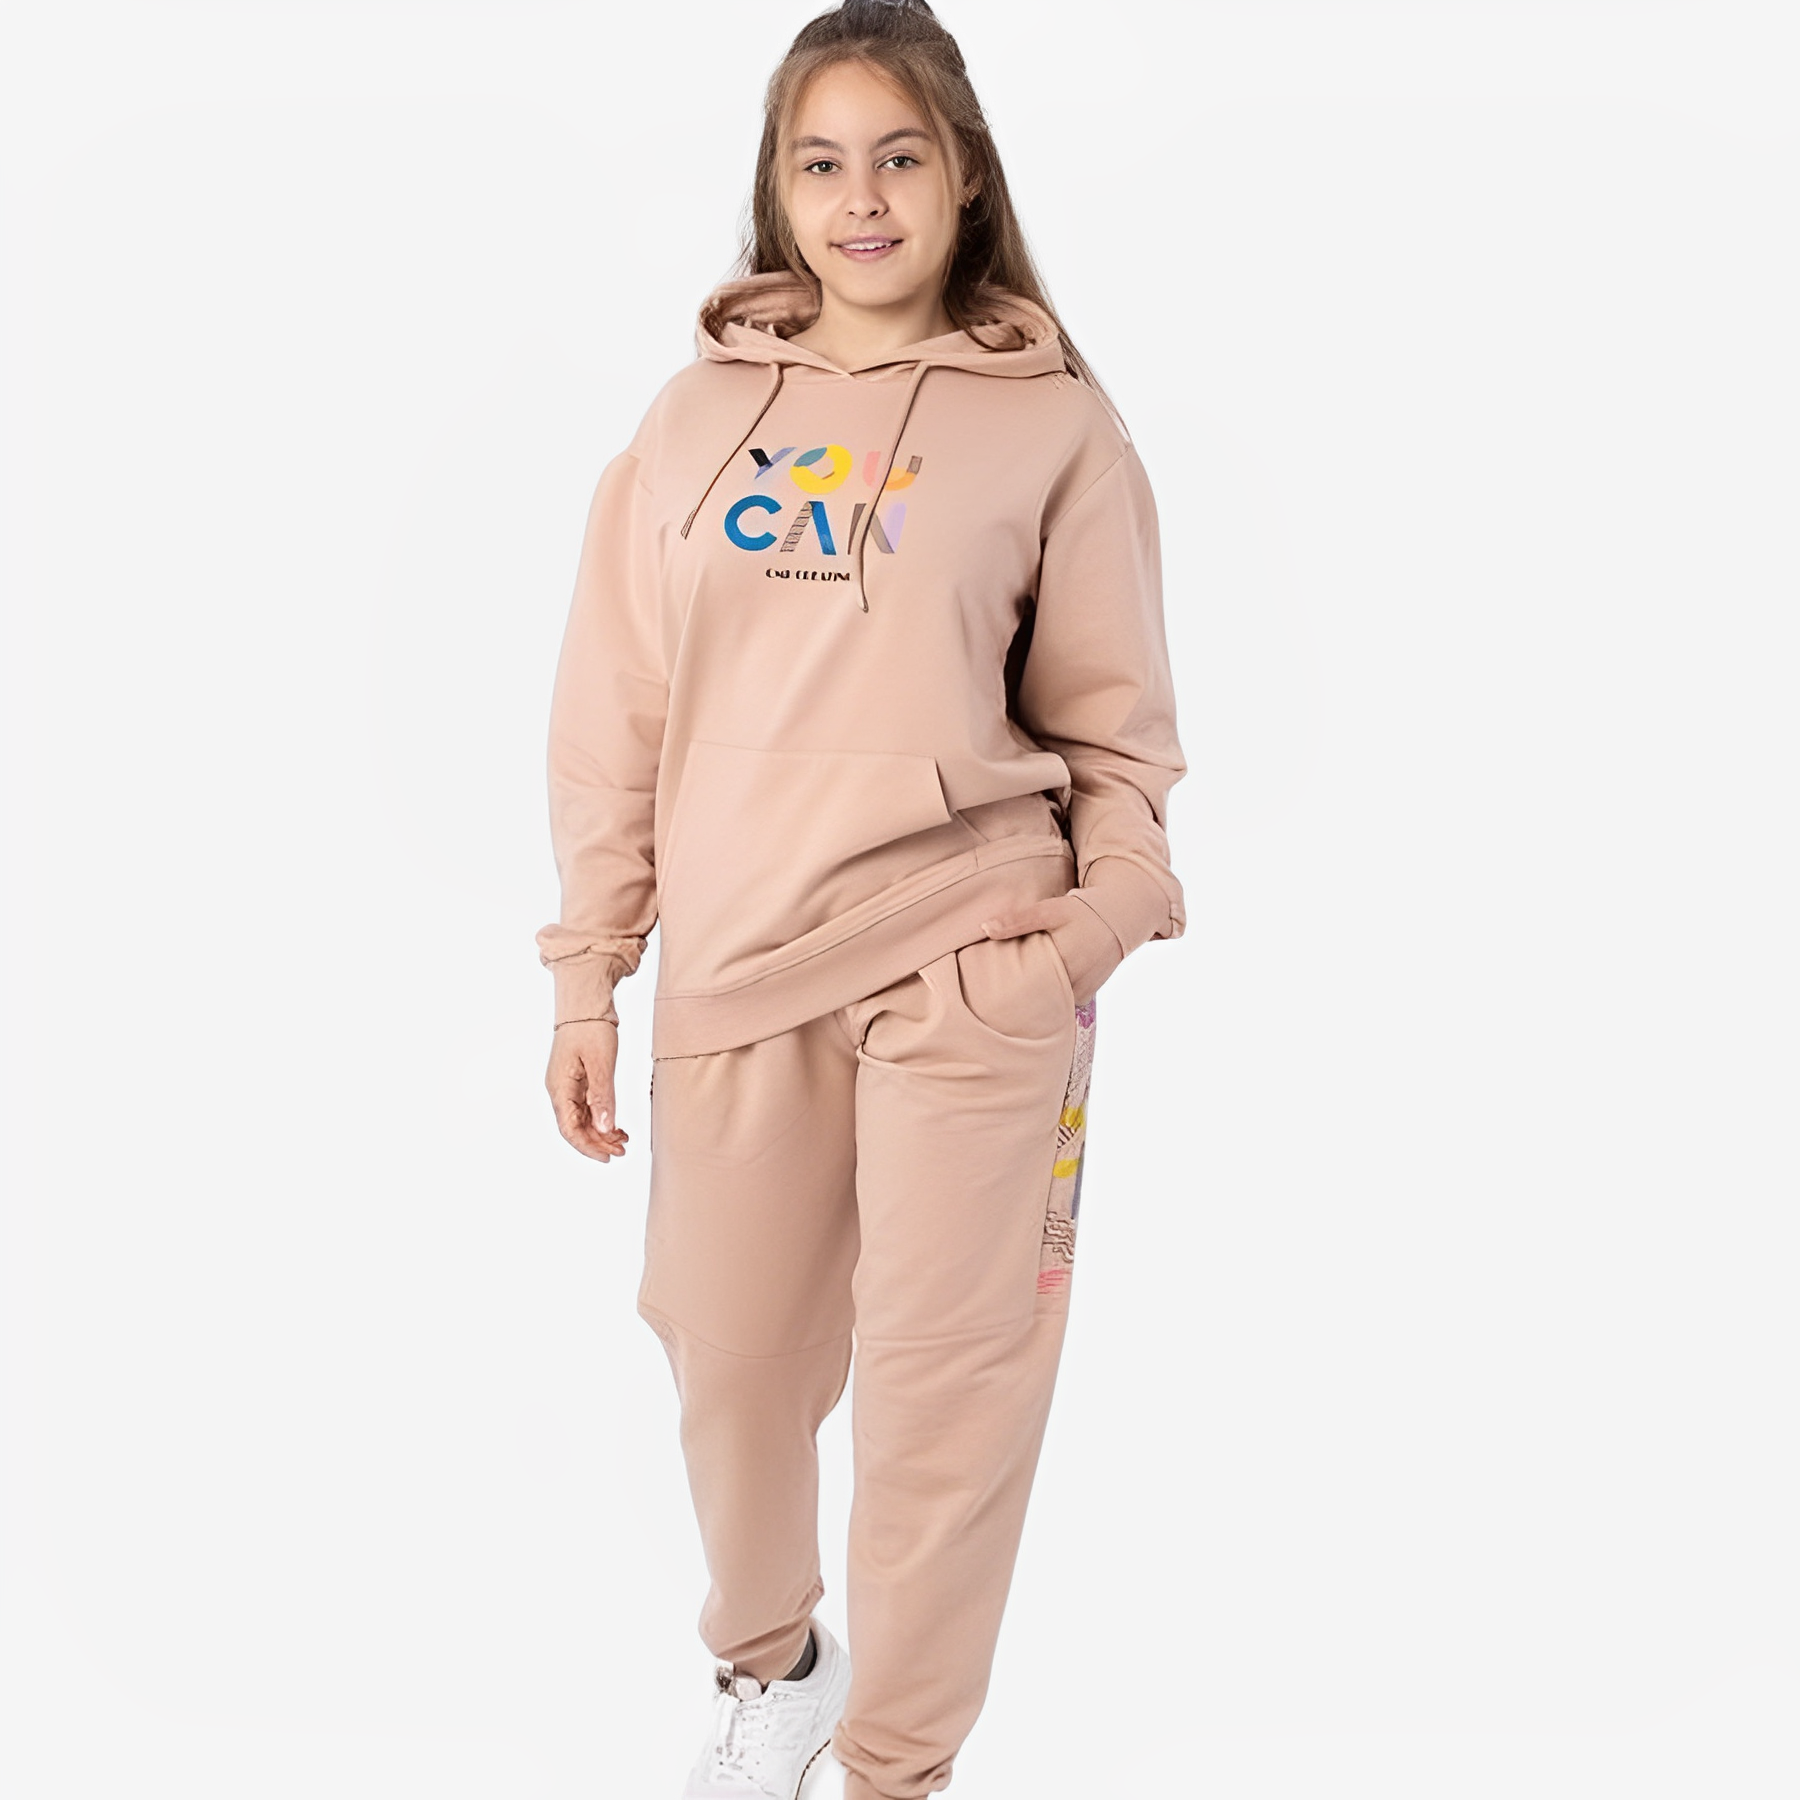 You Can! Girls Casual Set